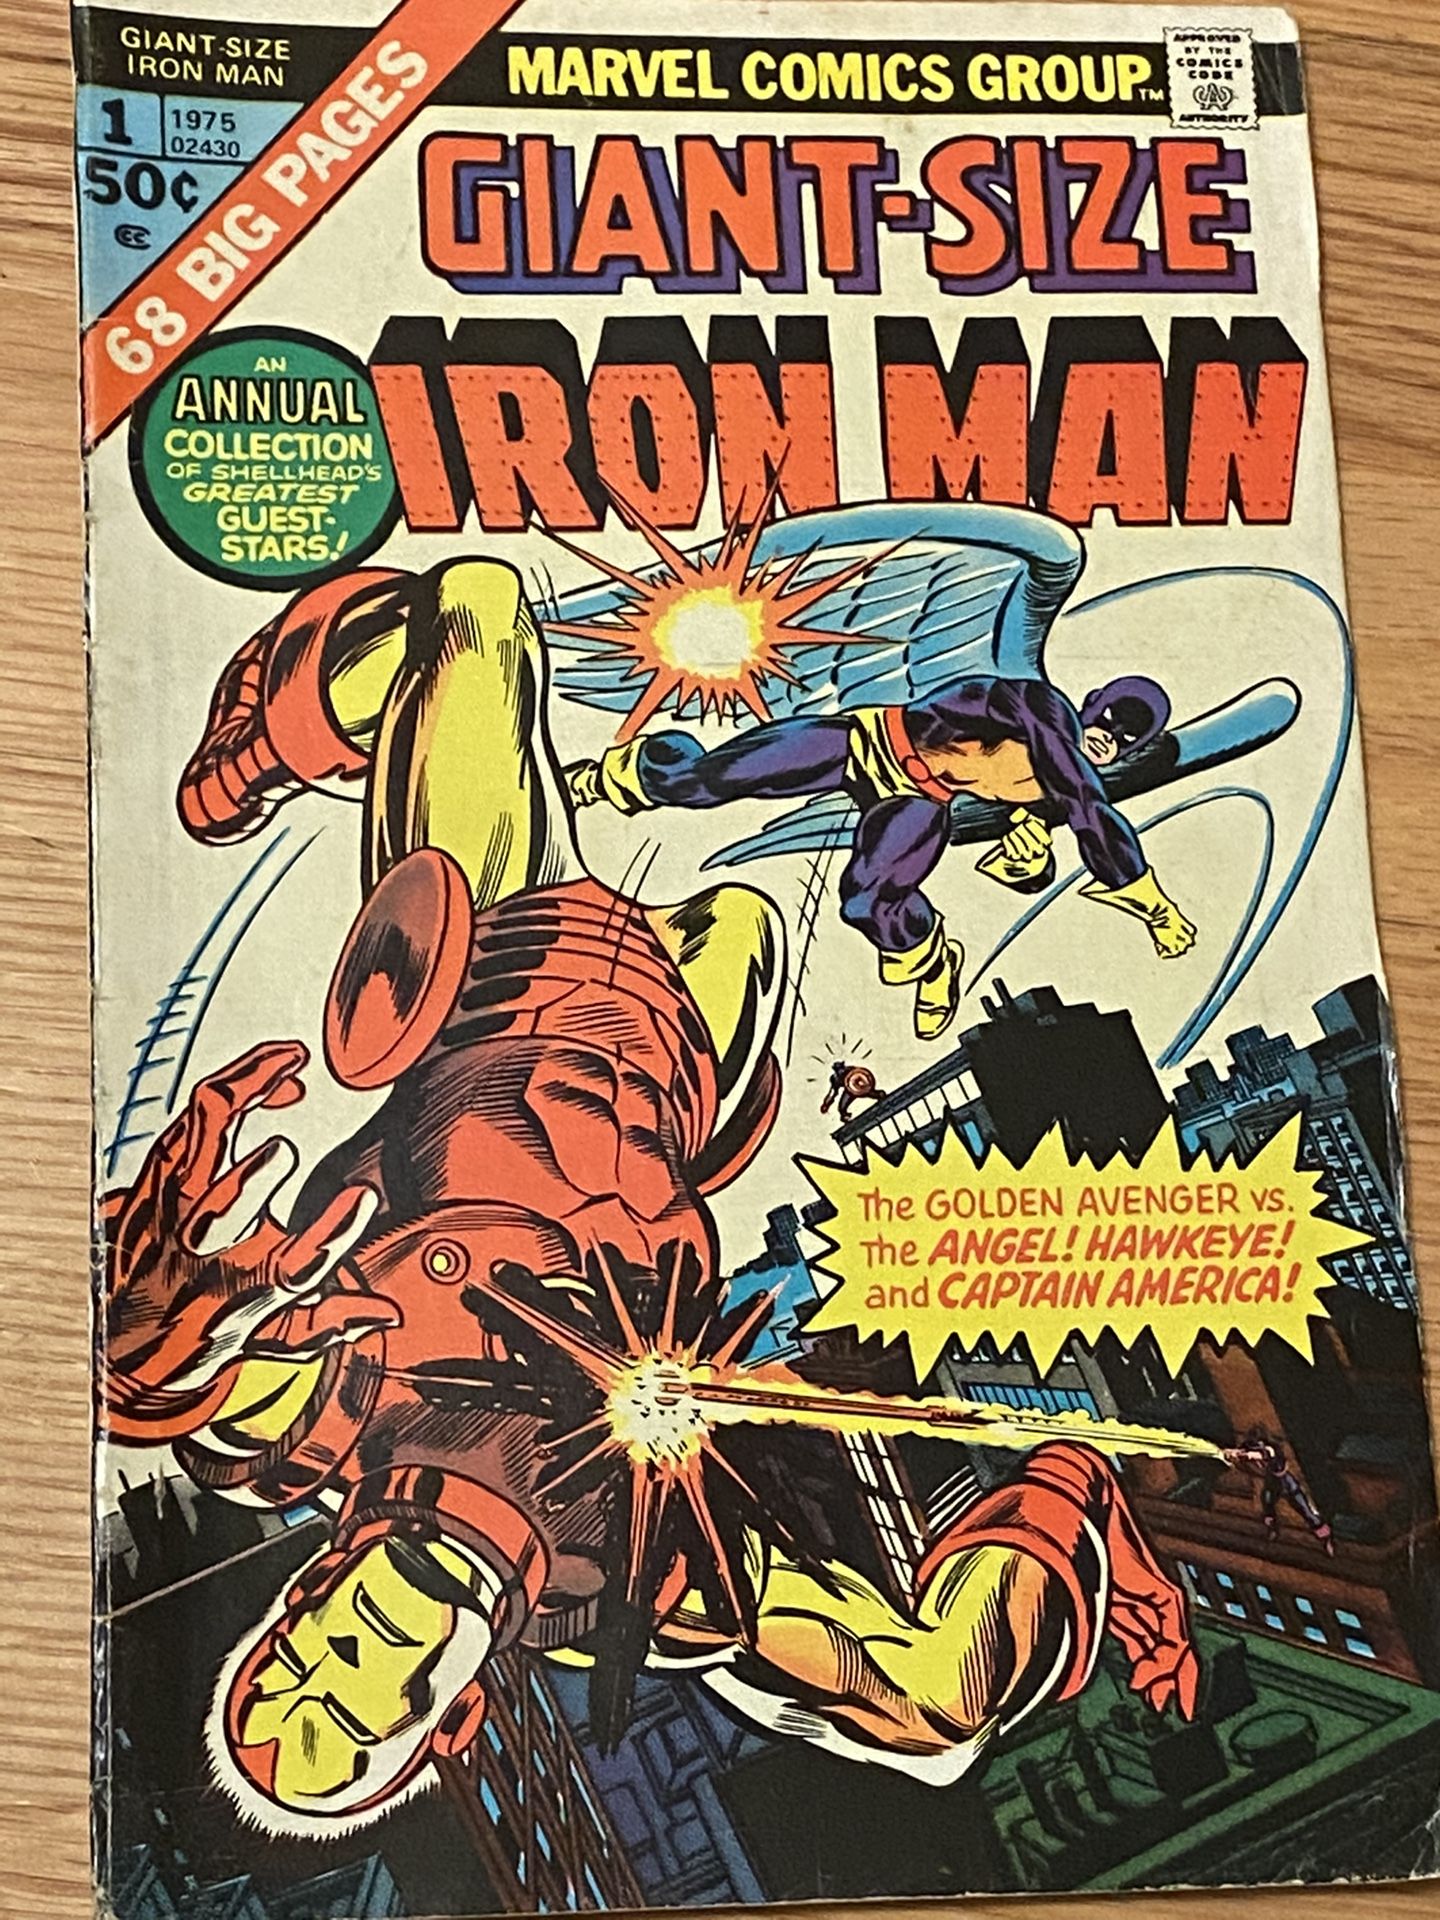 Giant size Iron Man 1 from 1975